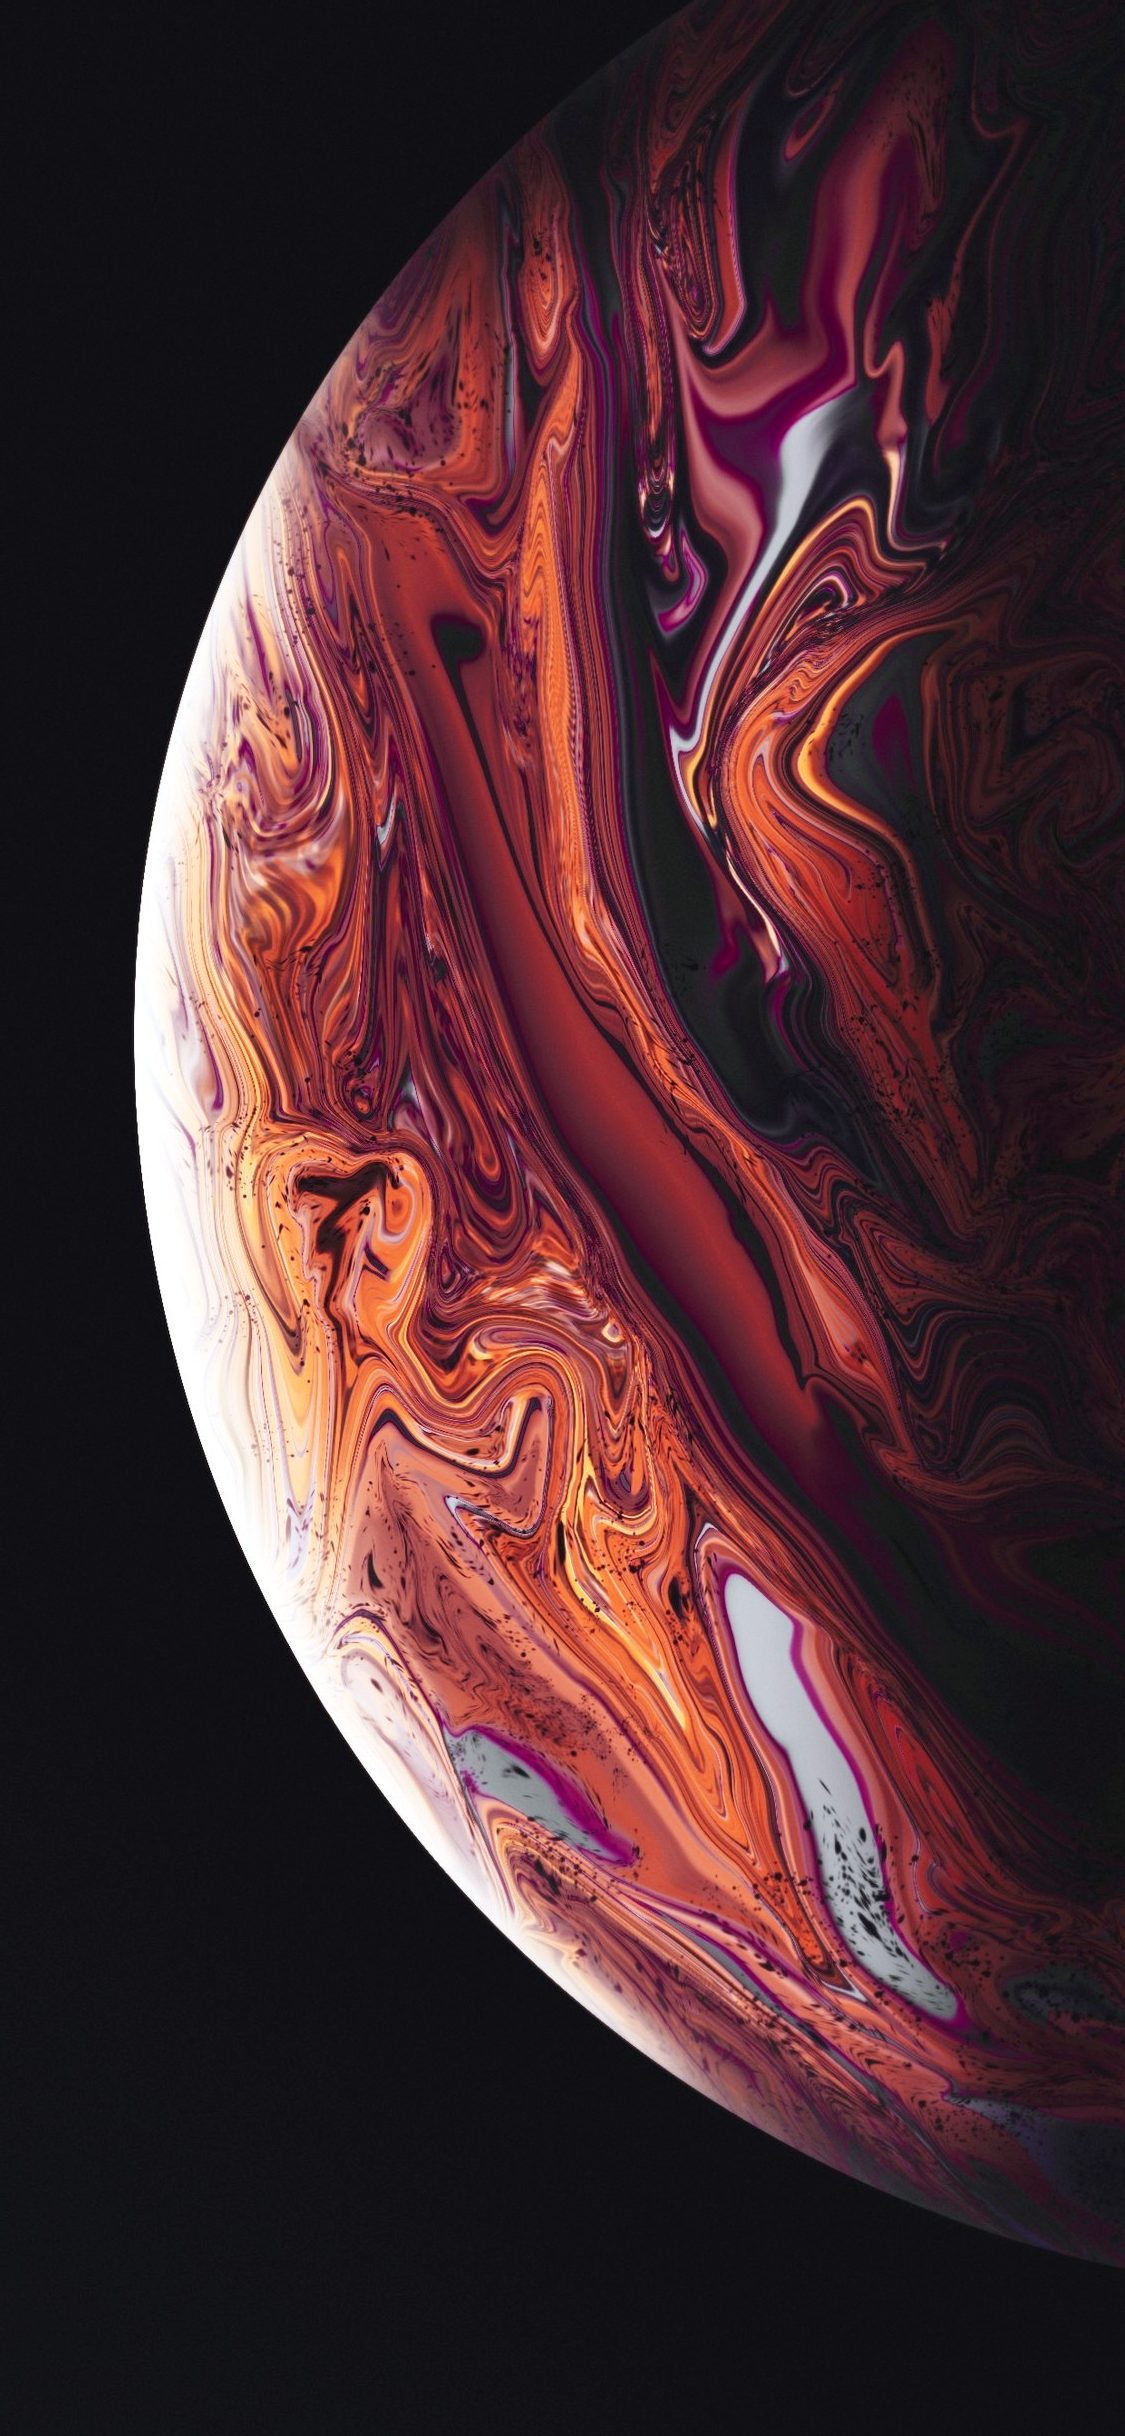 iPhone XS Home Screen Wallpaper With high-resolution 1125X2436 pixel. You can use this wallpaper for your iPhone 5, 6, 7, 8, X, XS, XR backgrounds, Mobile Screensaver, or iPad Lock Screen